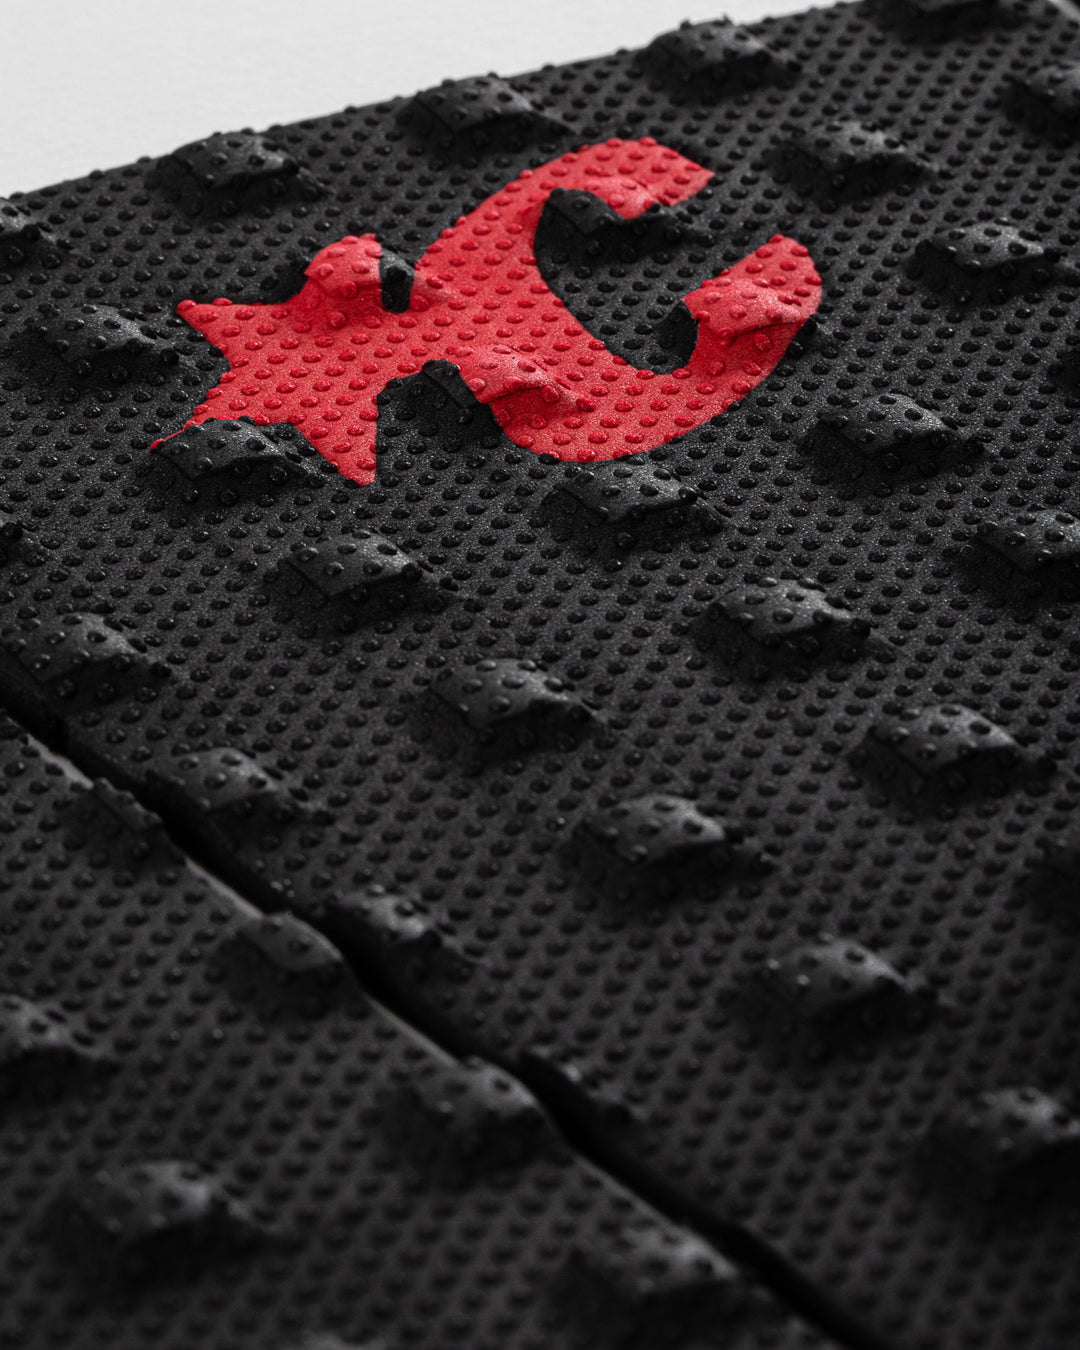 Mick Fanning Thermo Lite Traction